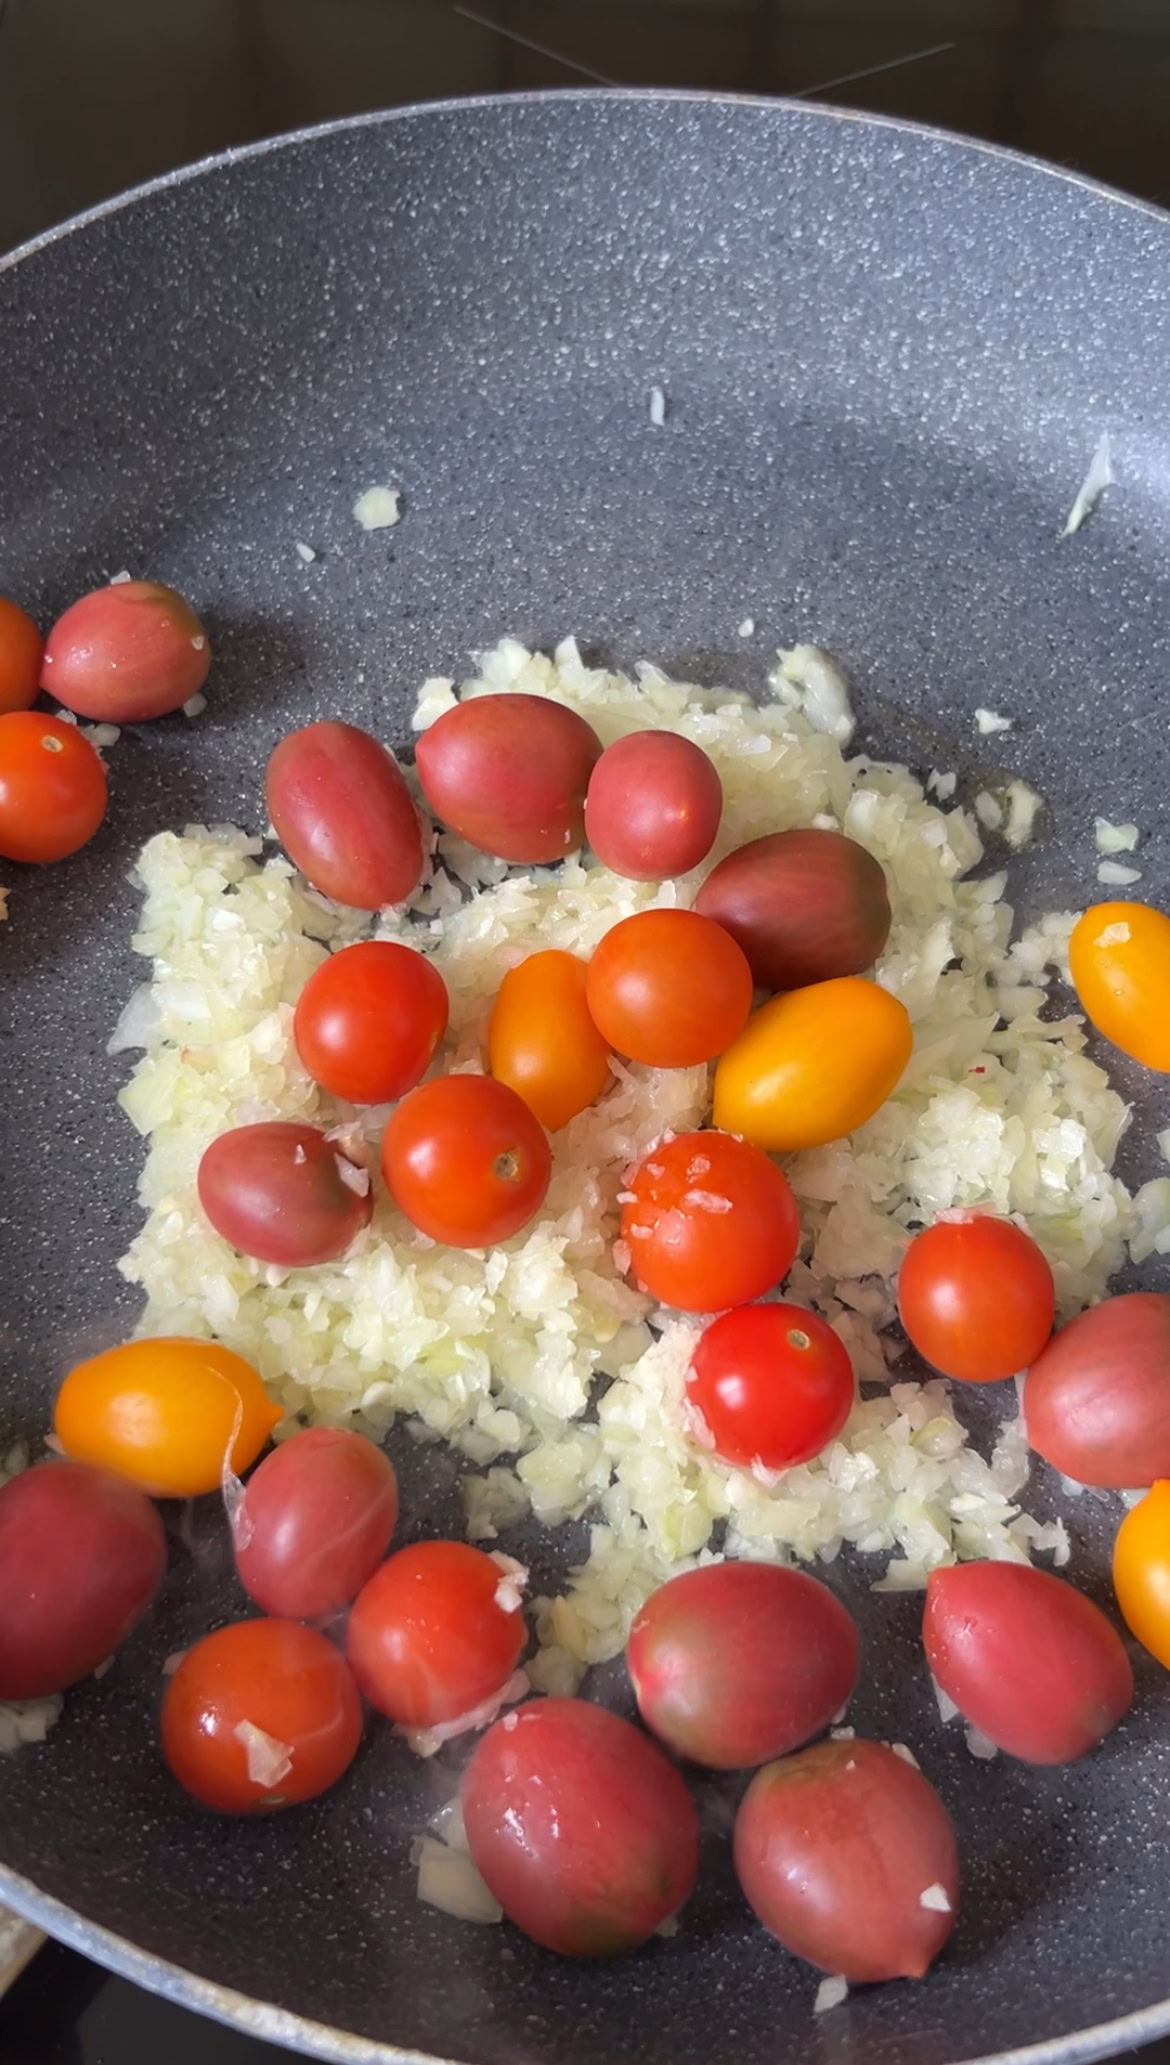 Minced onion and garlic in a frying pan with cherry tomatoes.